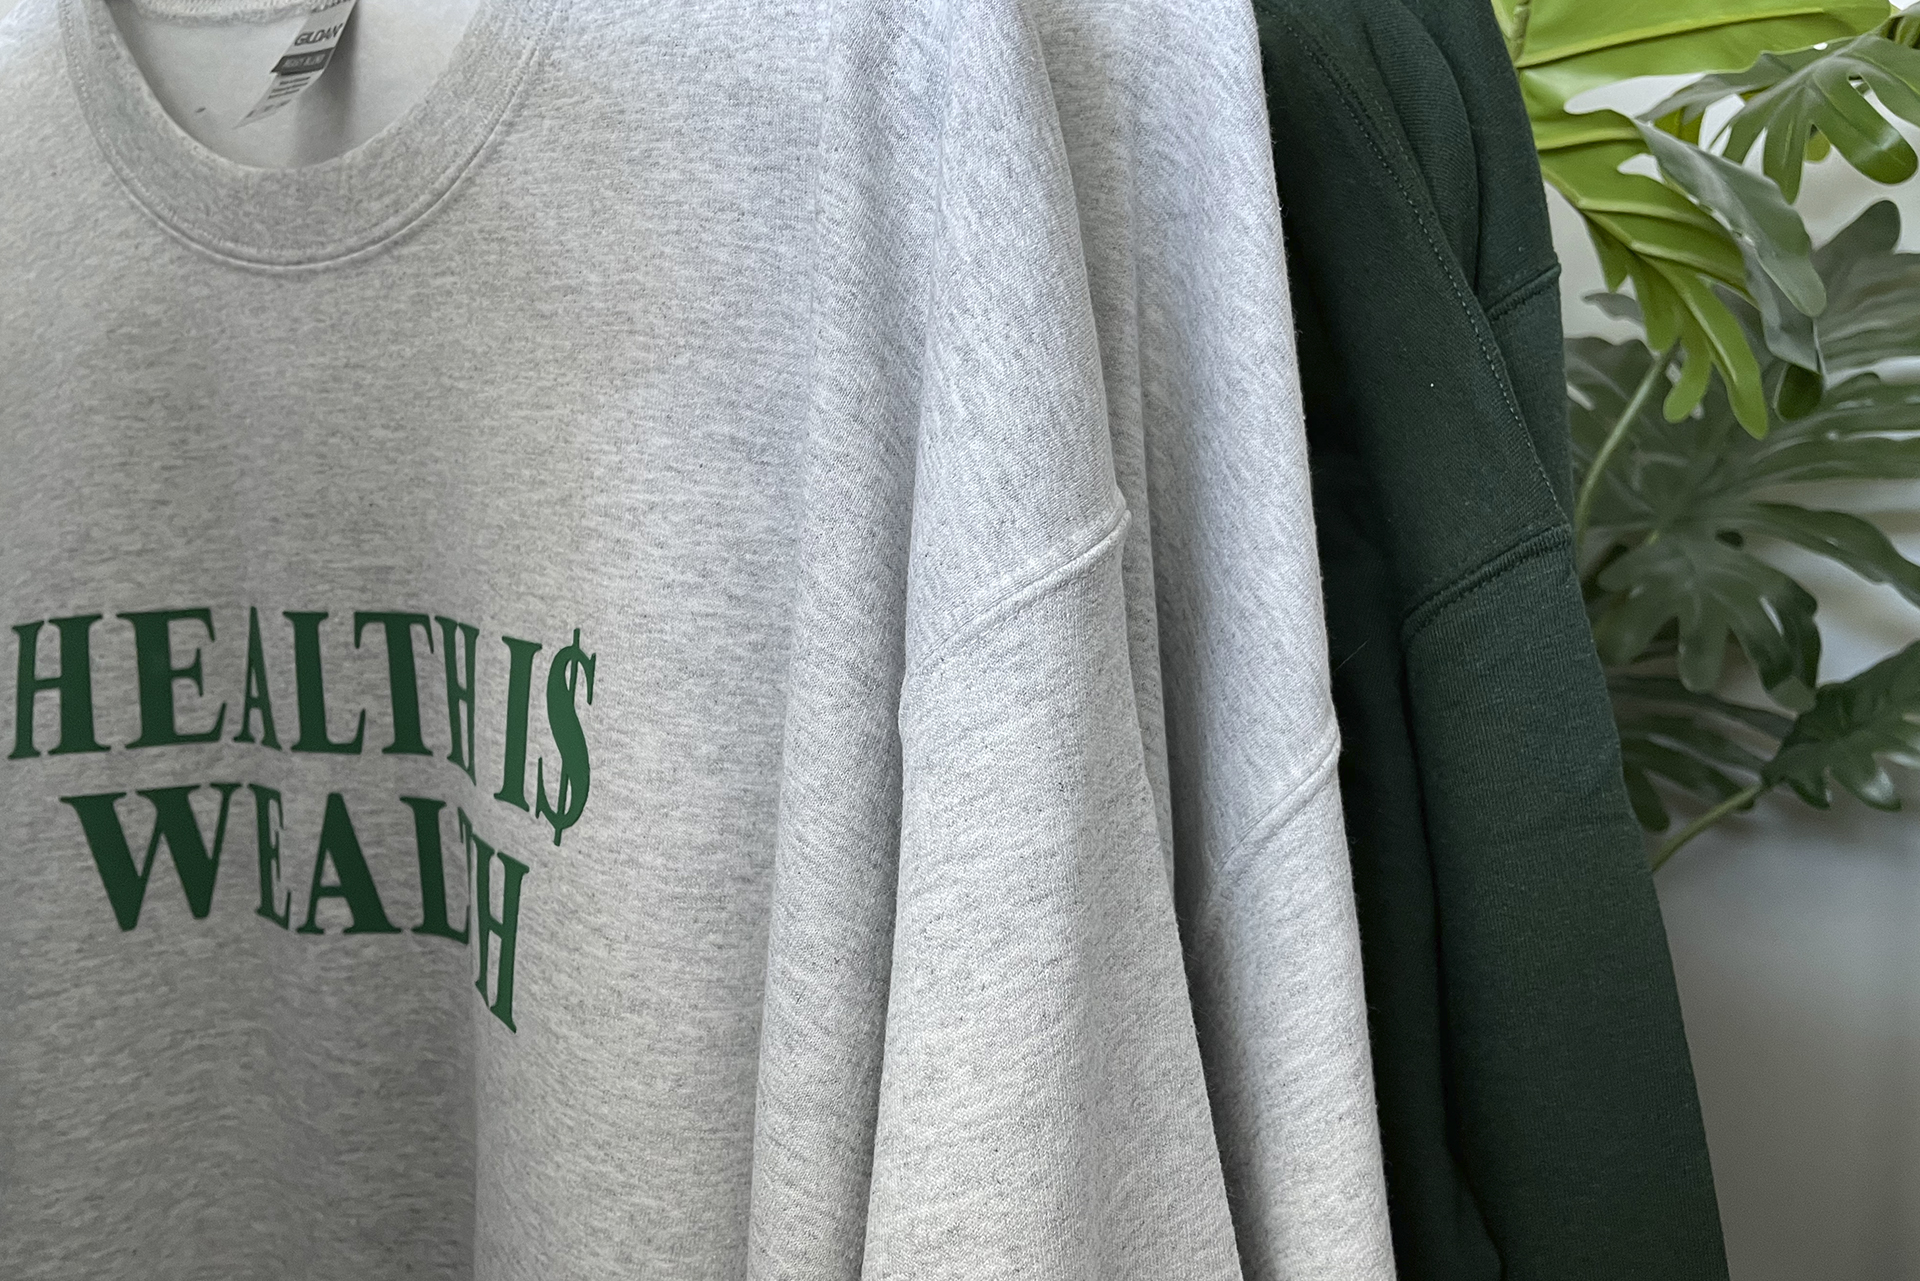 Be Well With Kayla merchandise sweatshirts that say Health is Wealth on the front.